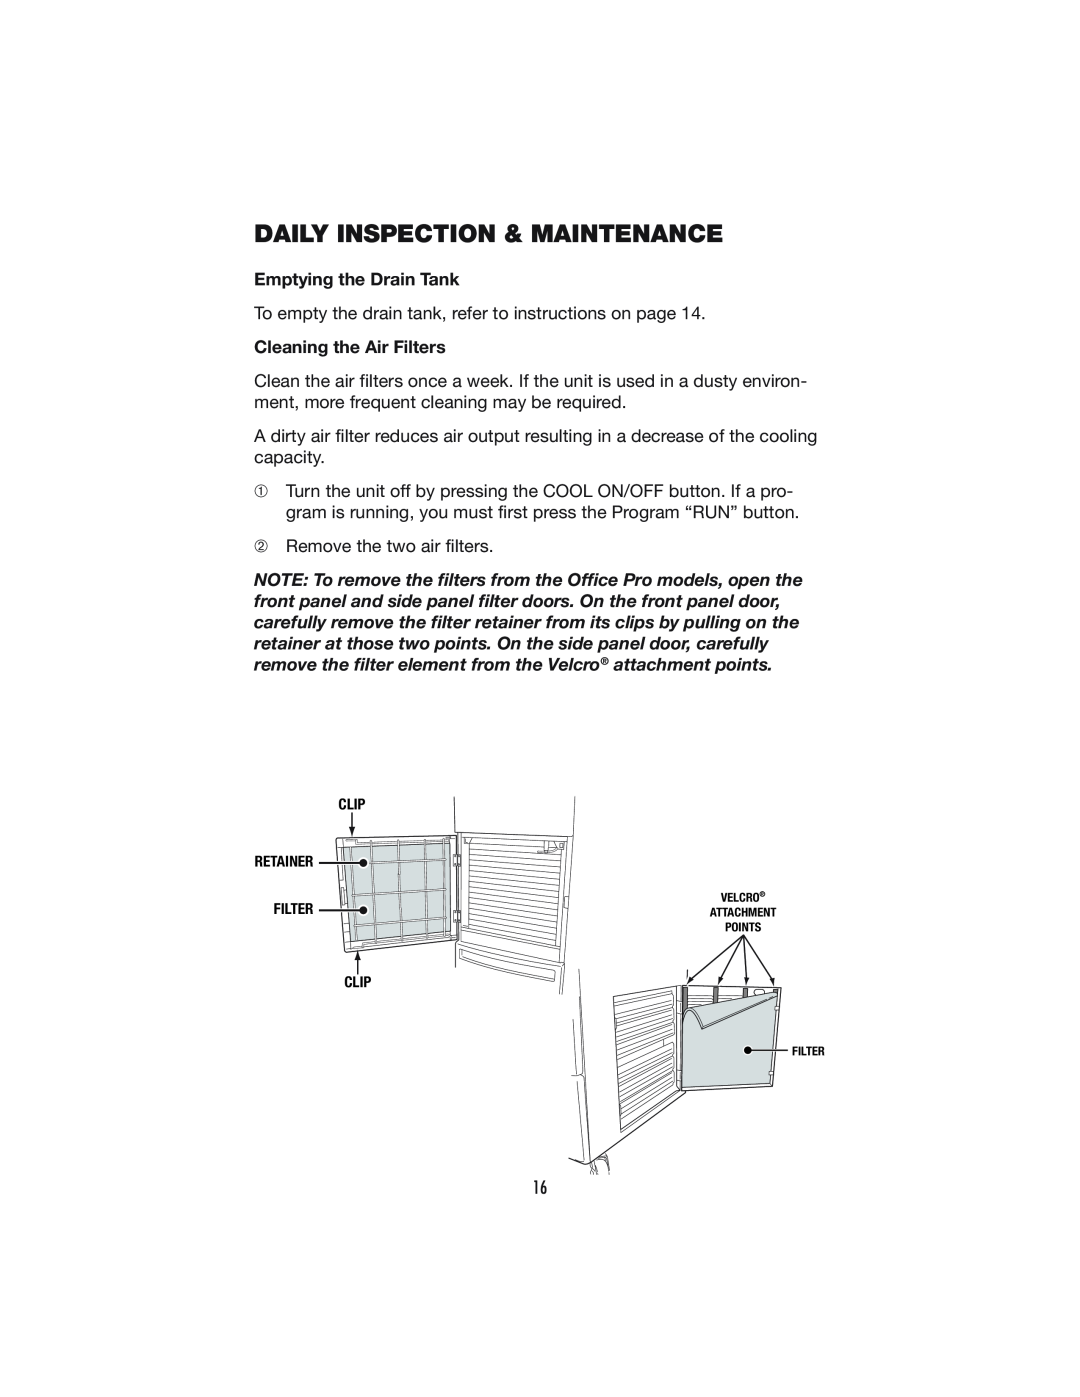 Denso PRO 18 operation manual Daily Inspection & Maintenance, Cleaning the Air Filters, Emptying the Drain Tank 